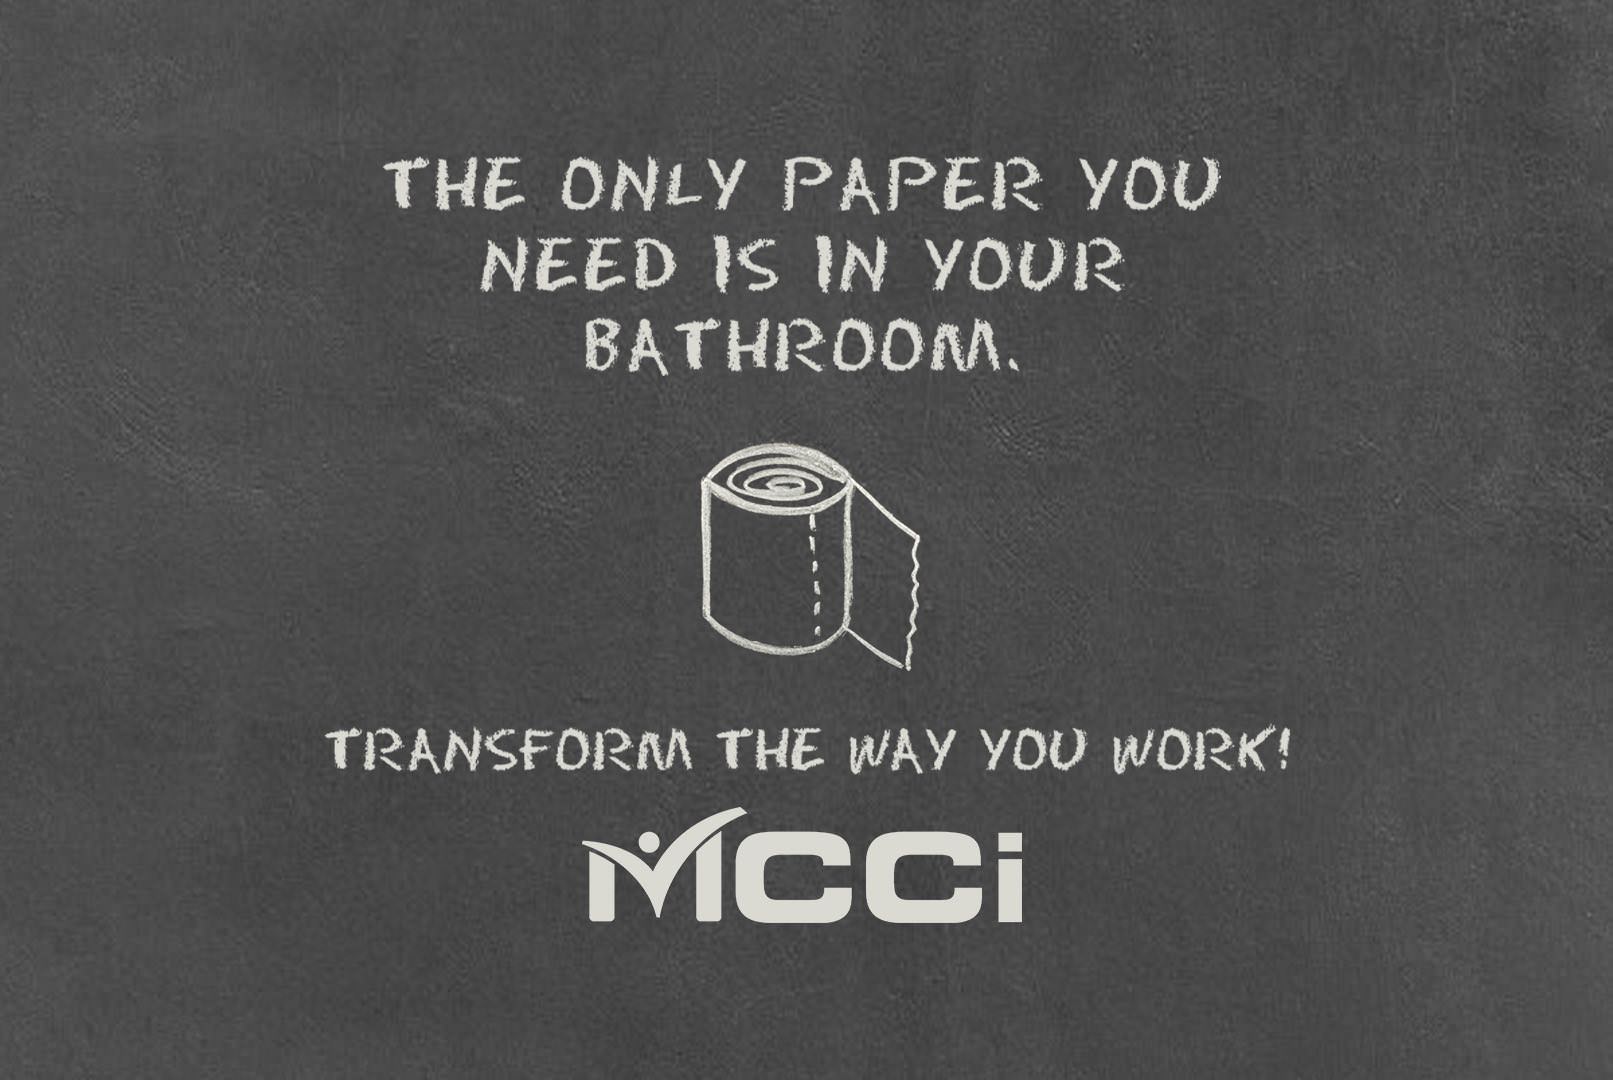 Image of toilet paper saying that the only paper you need is in your bathroom!